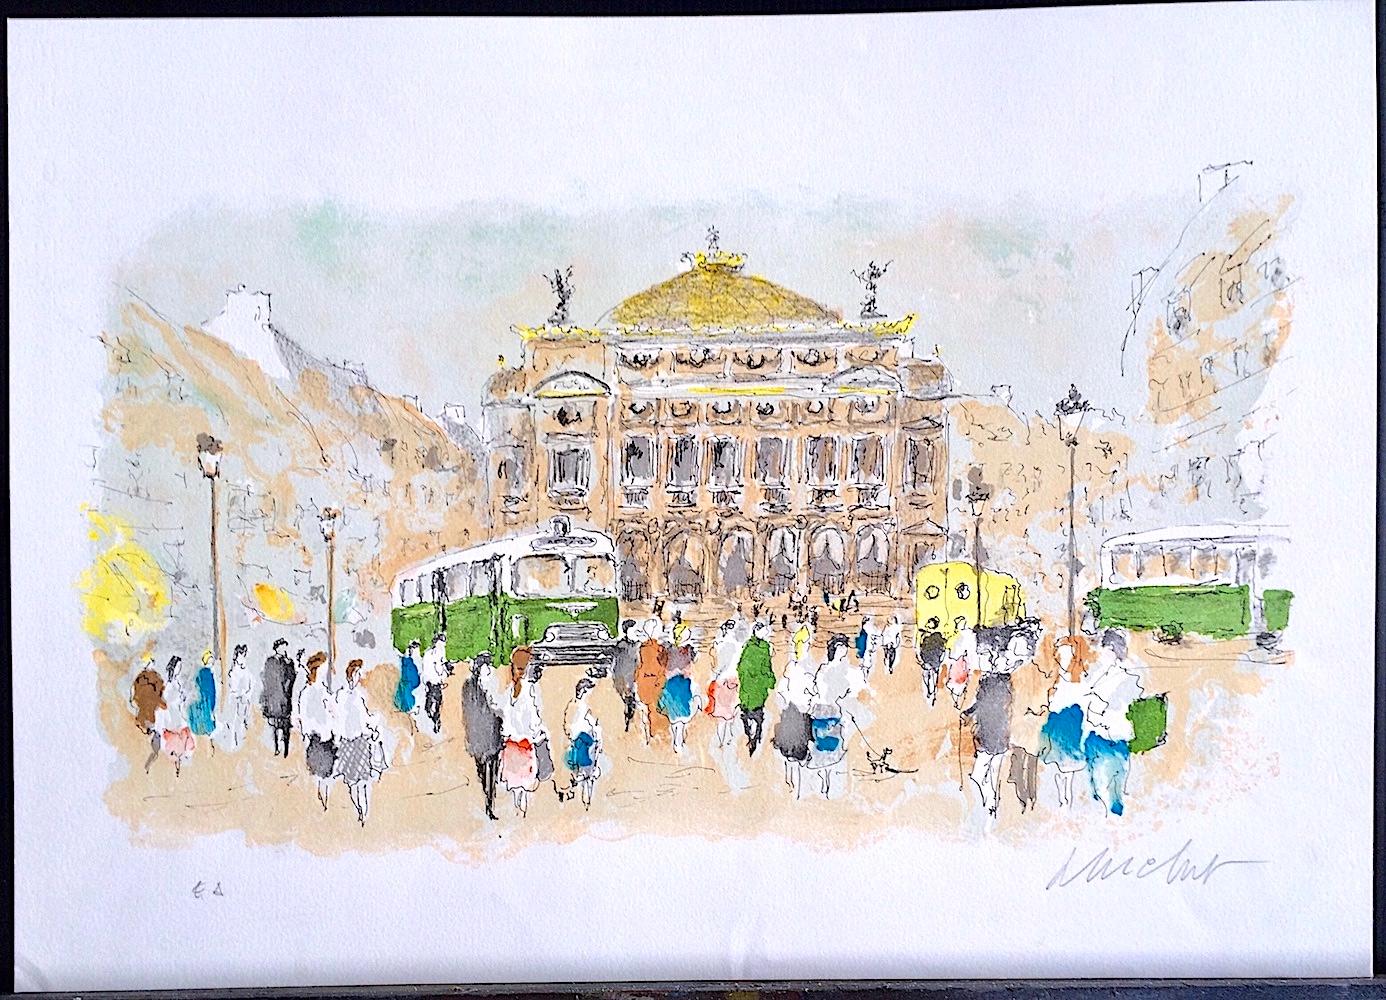 PARIS OPERA HOUSE Signed Lithograph, Iconic French Architecture, Green Bus Paris - Contemporary Print by Urbain Huchet